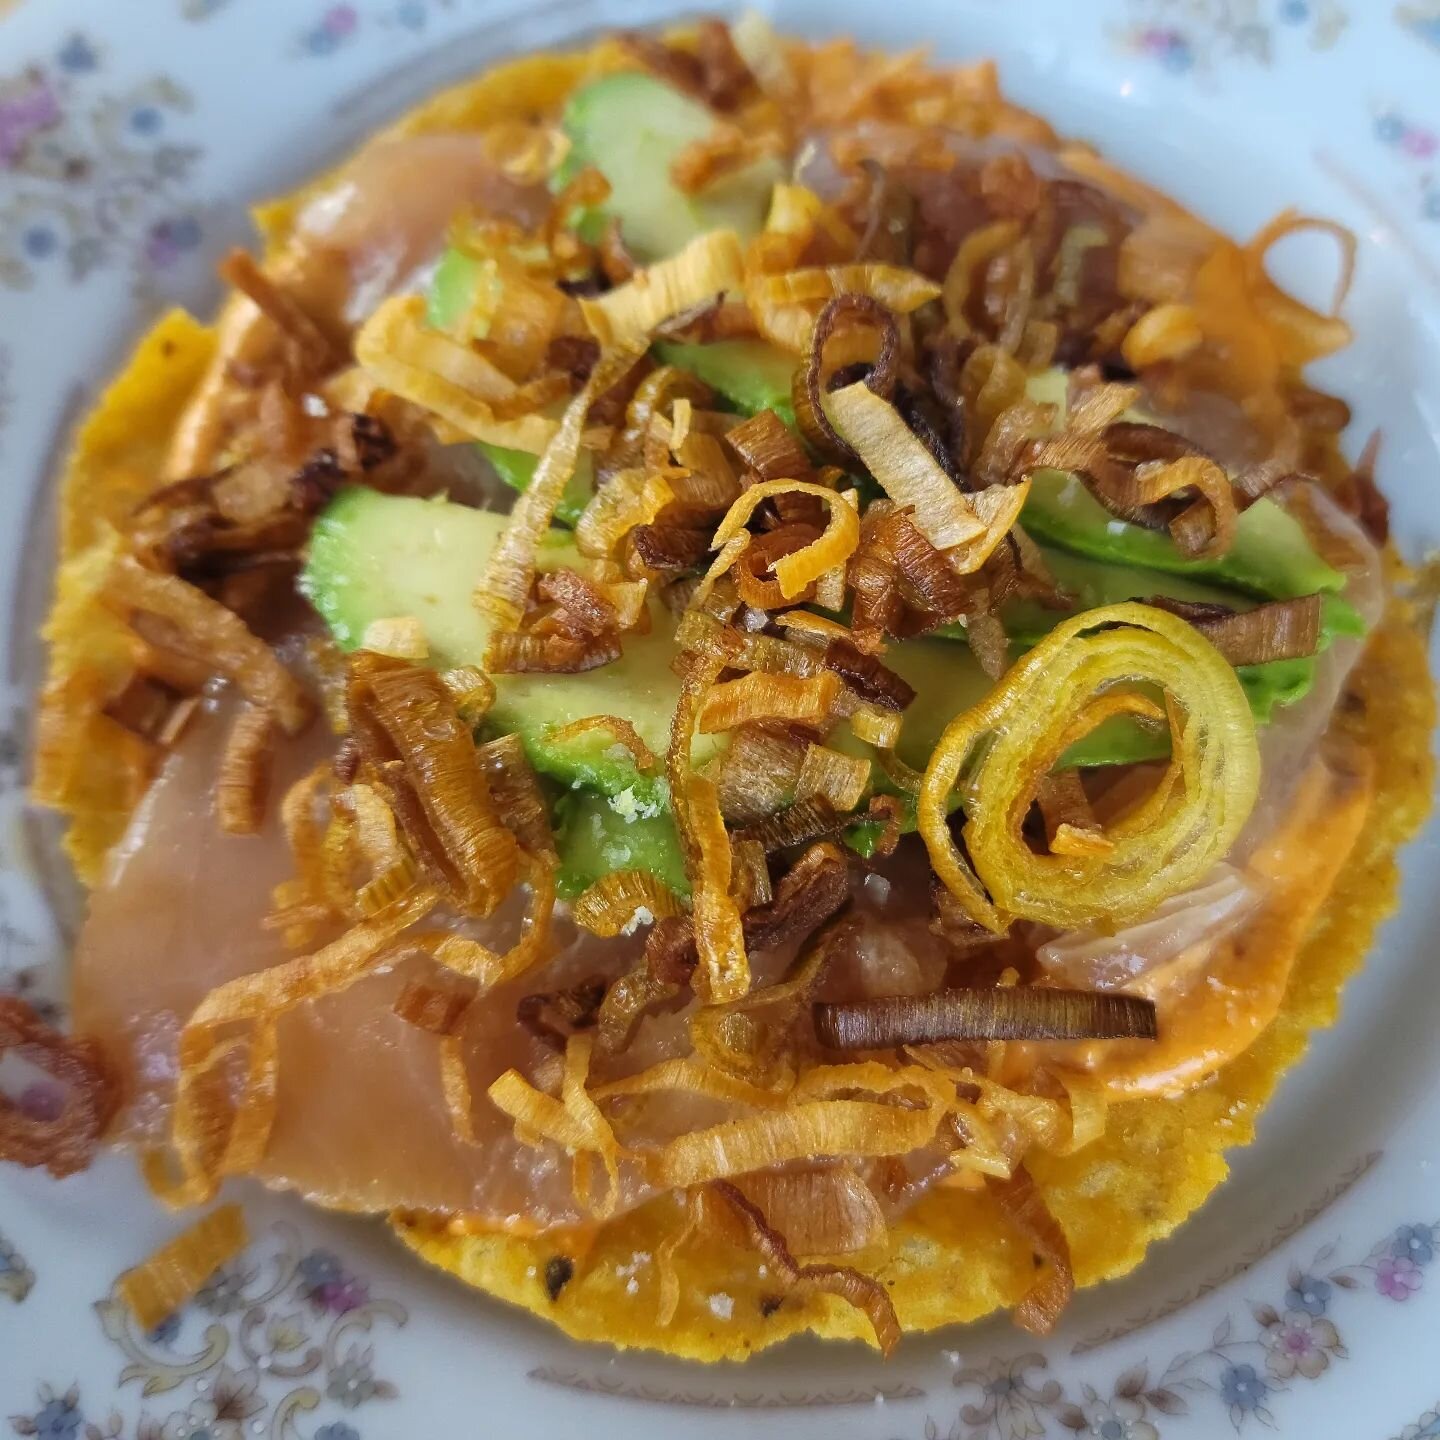 HIGHLY recommend the pop up, Pancita, at Pair. This is the Albacore Tuna Tostada, and unbelievably delicious. Everything we had was amazing. #tostadas #pairseattle #pairrestaurant #menu #janetbecerra #mexicanfood #delicious #deliciousfood #seattleres